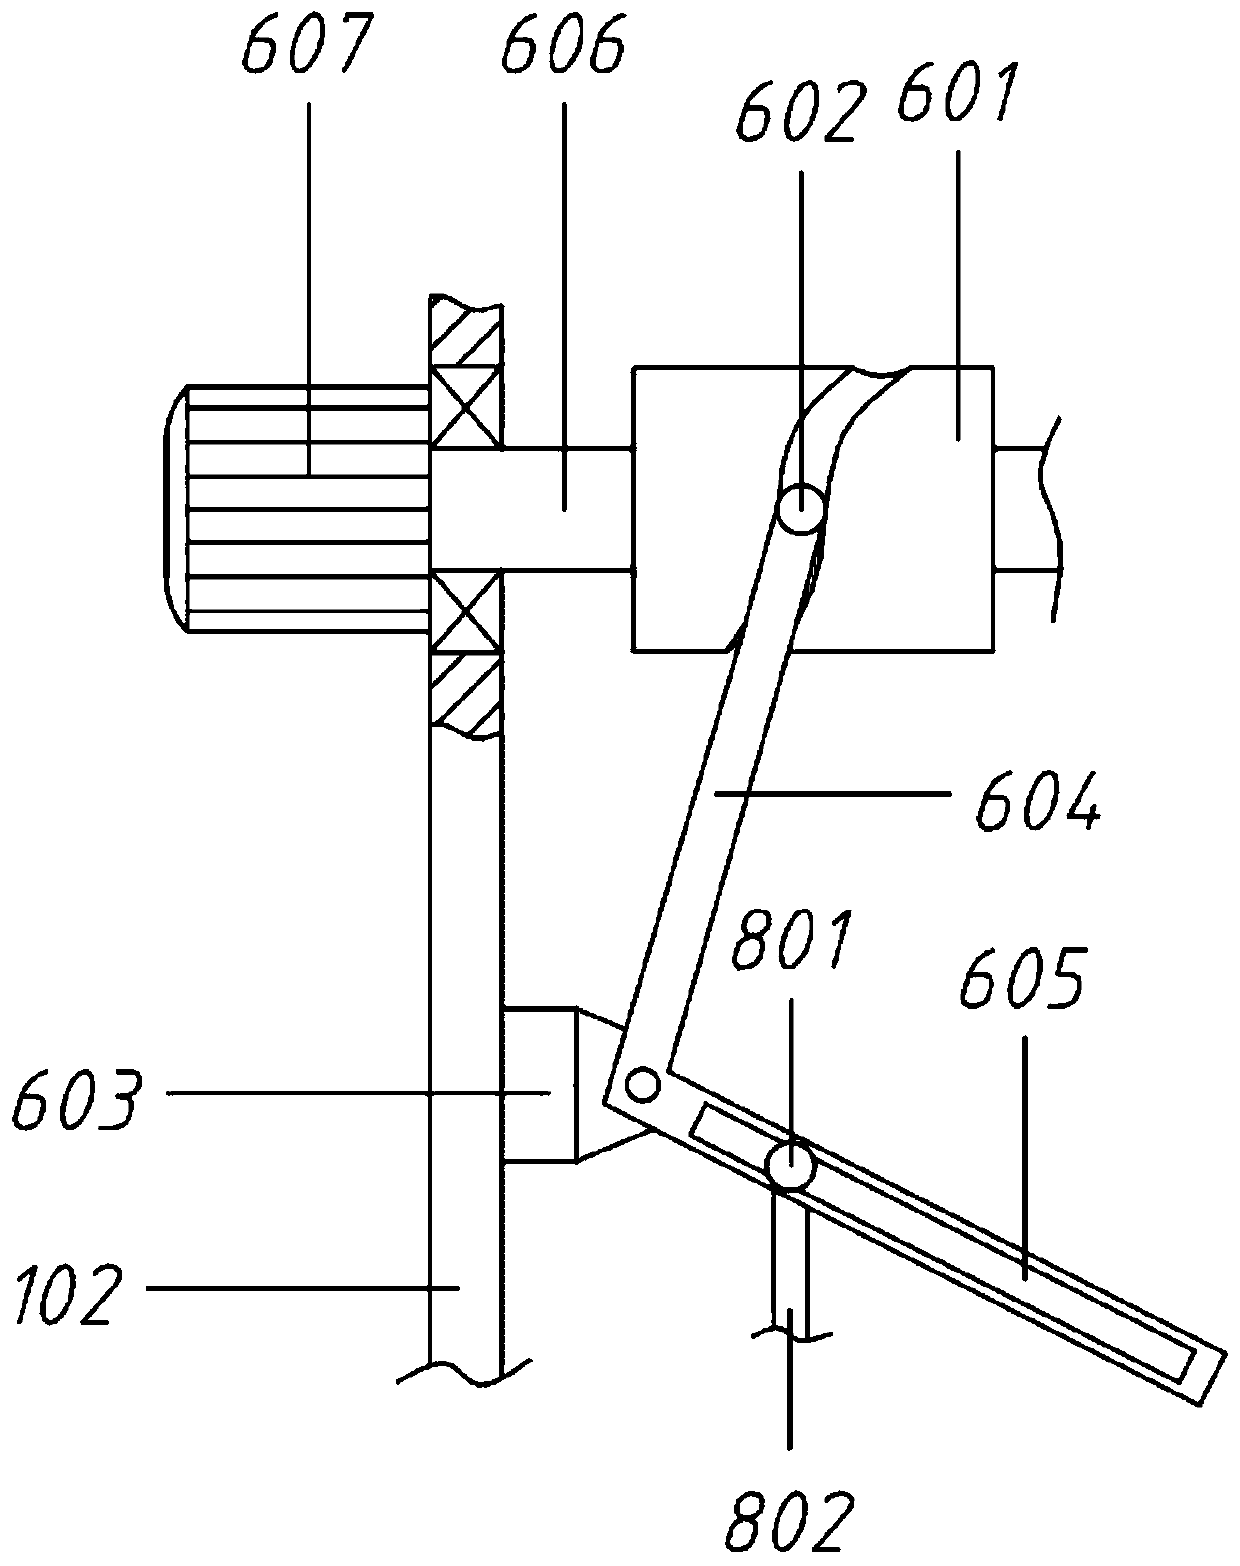 Shaking type feed screening machine based on cylindrical cam driving